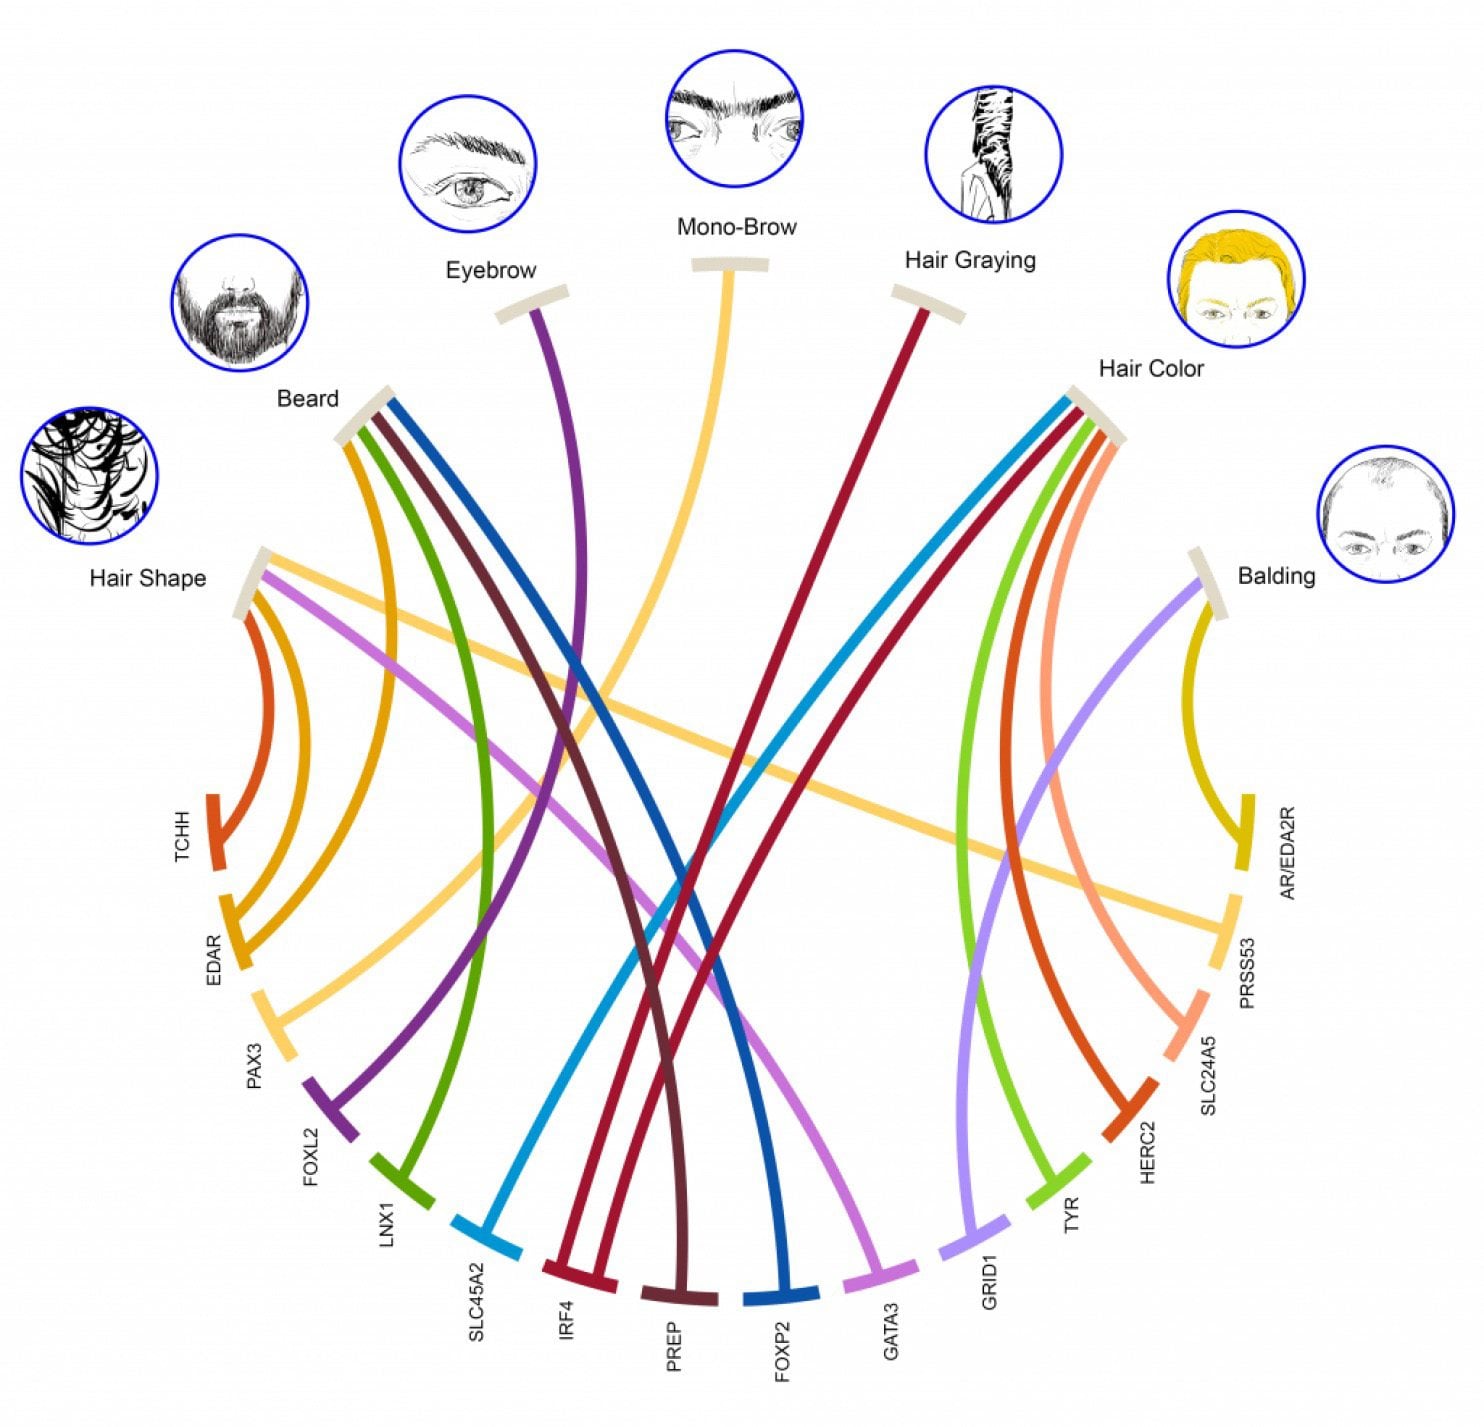 Lines connect hair types with the genetic regions associated with each trait.